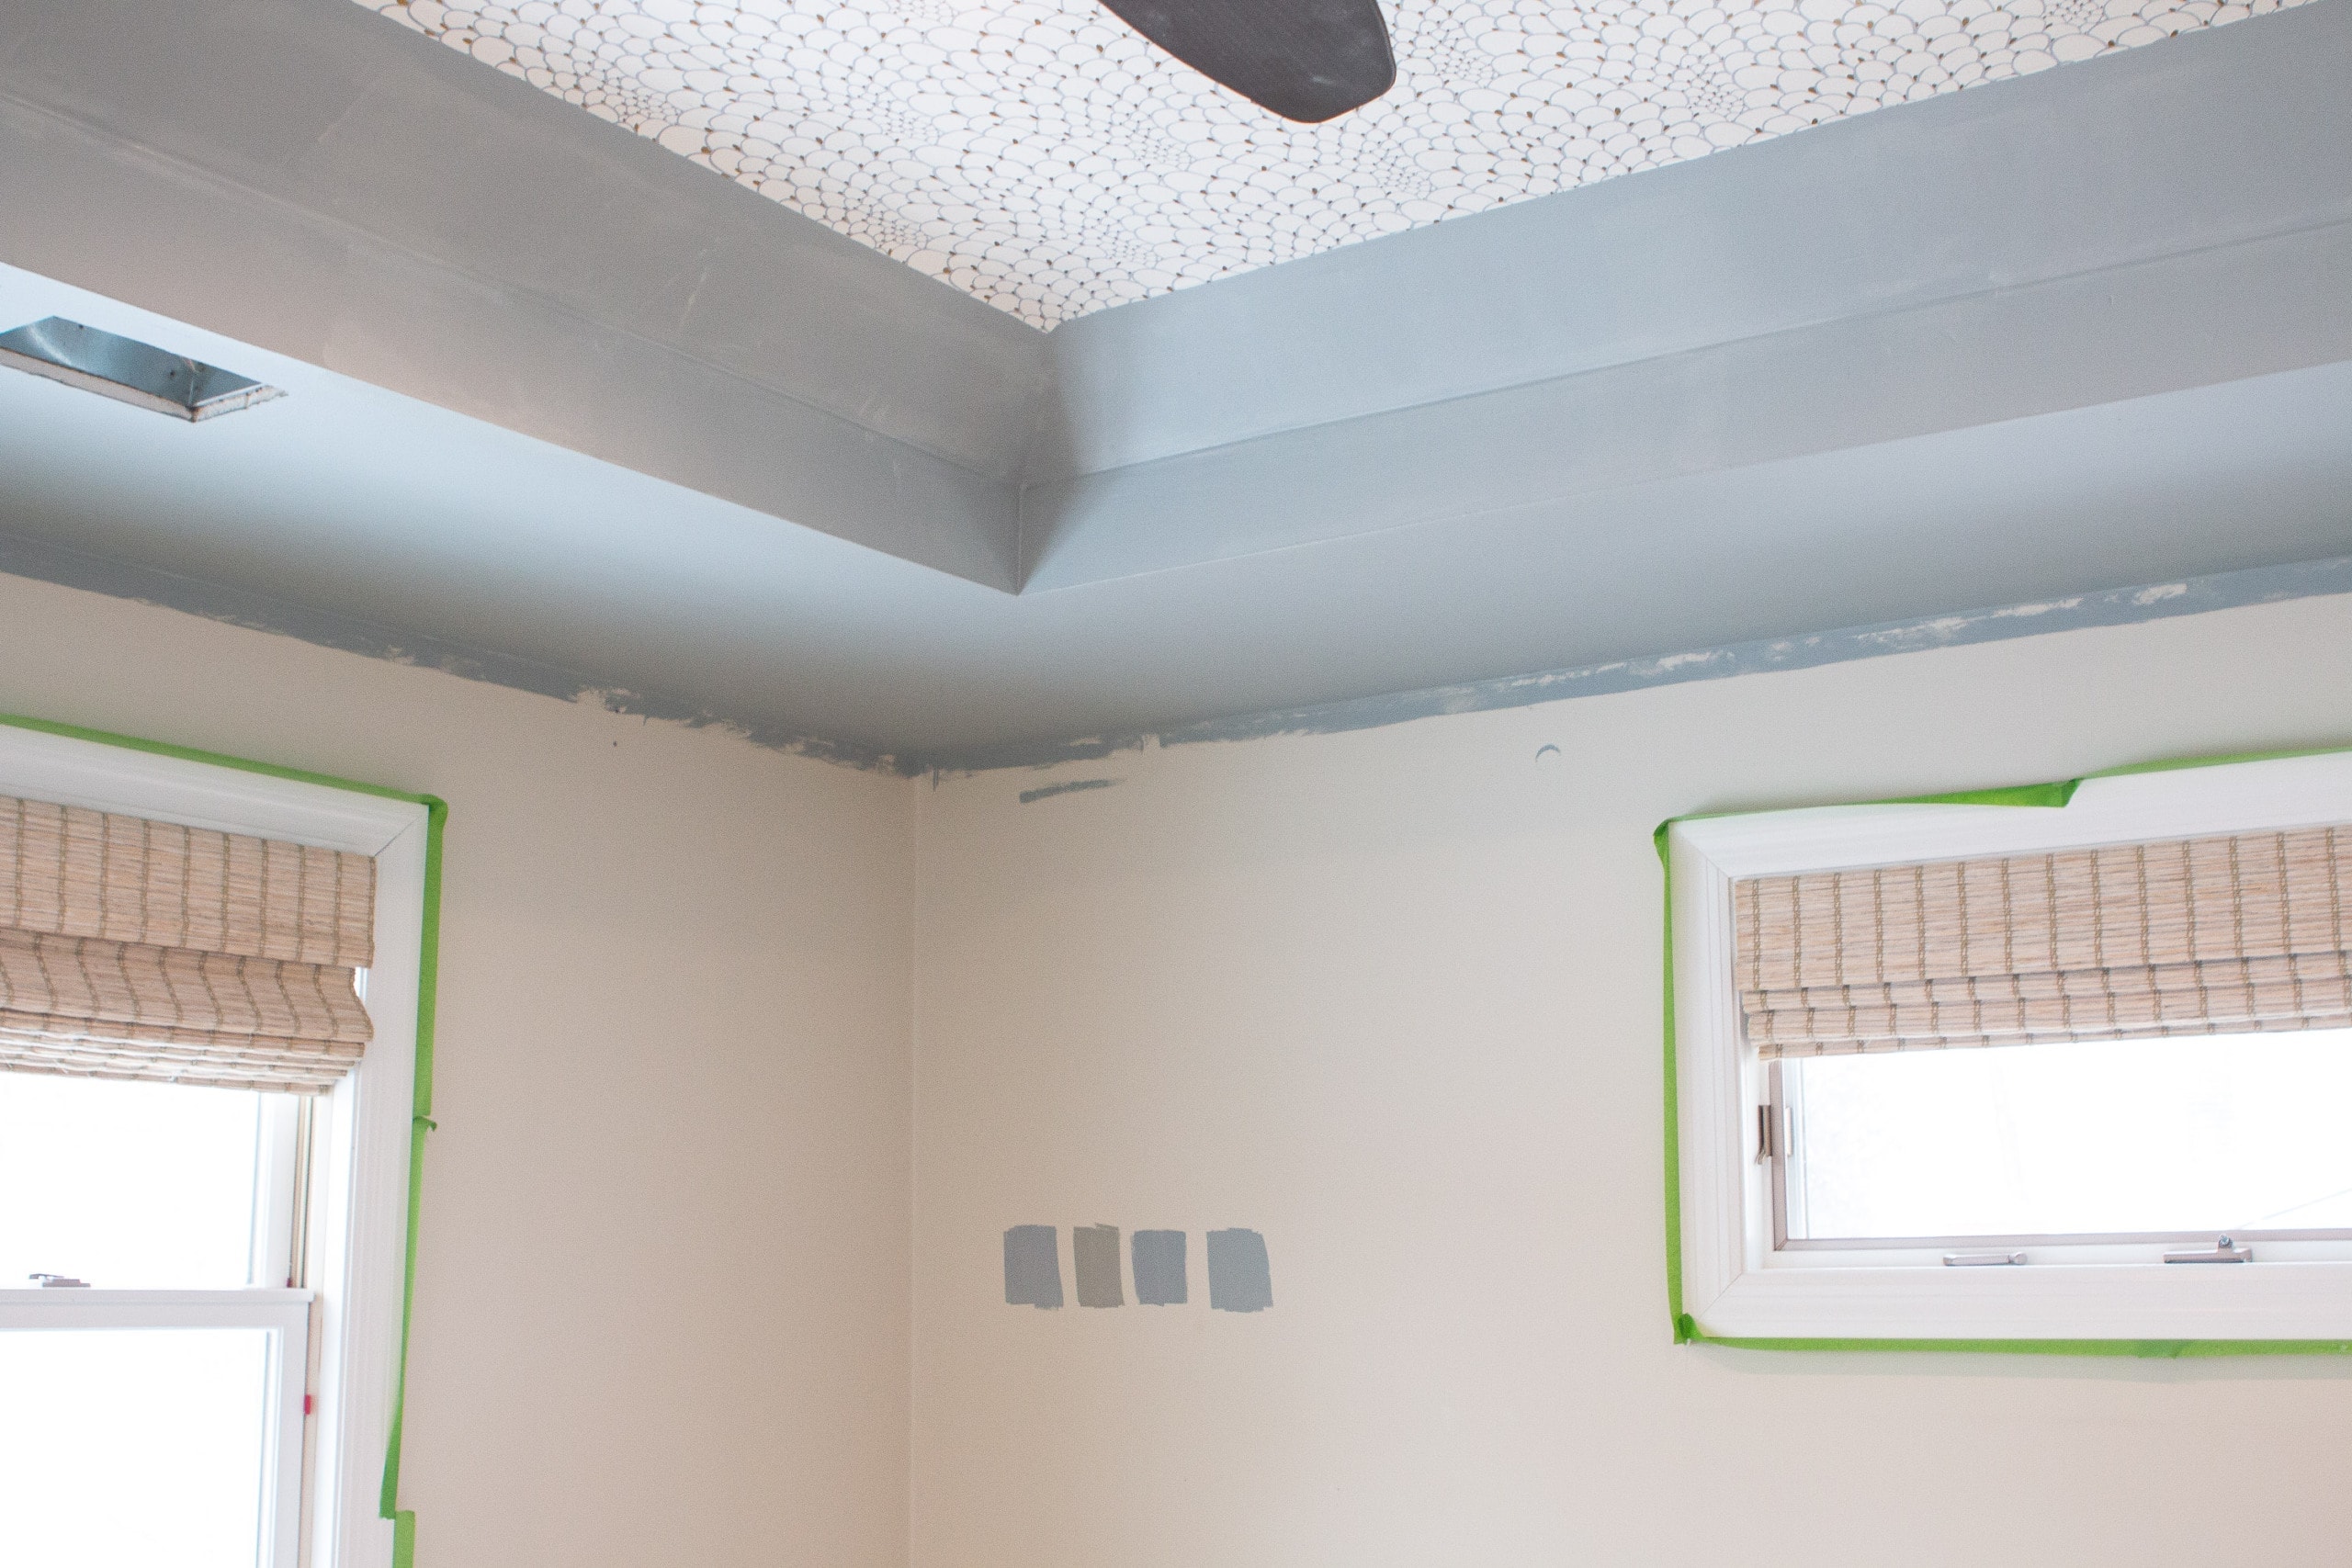 Painting our ceiling a blue gray paint color